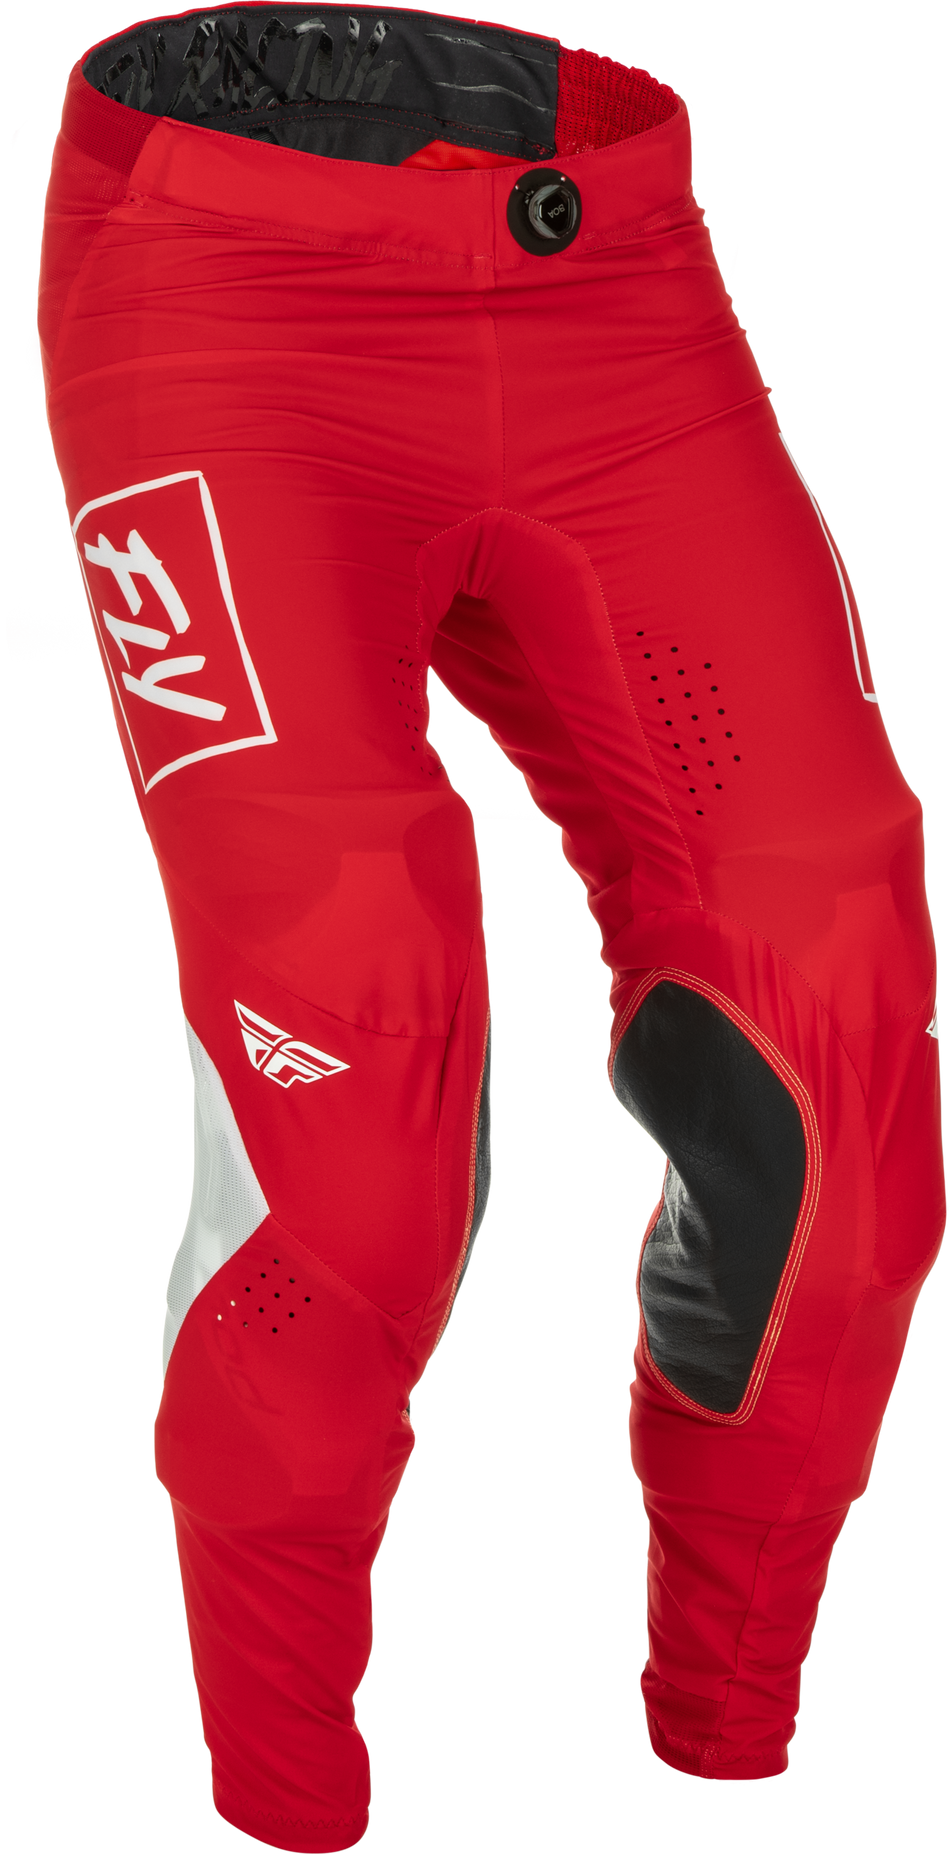 FLY RACING Lite Pants Red/White Size 36 375-73236